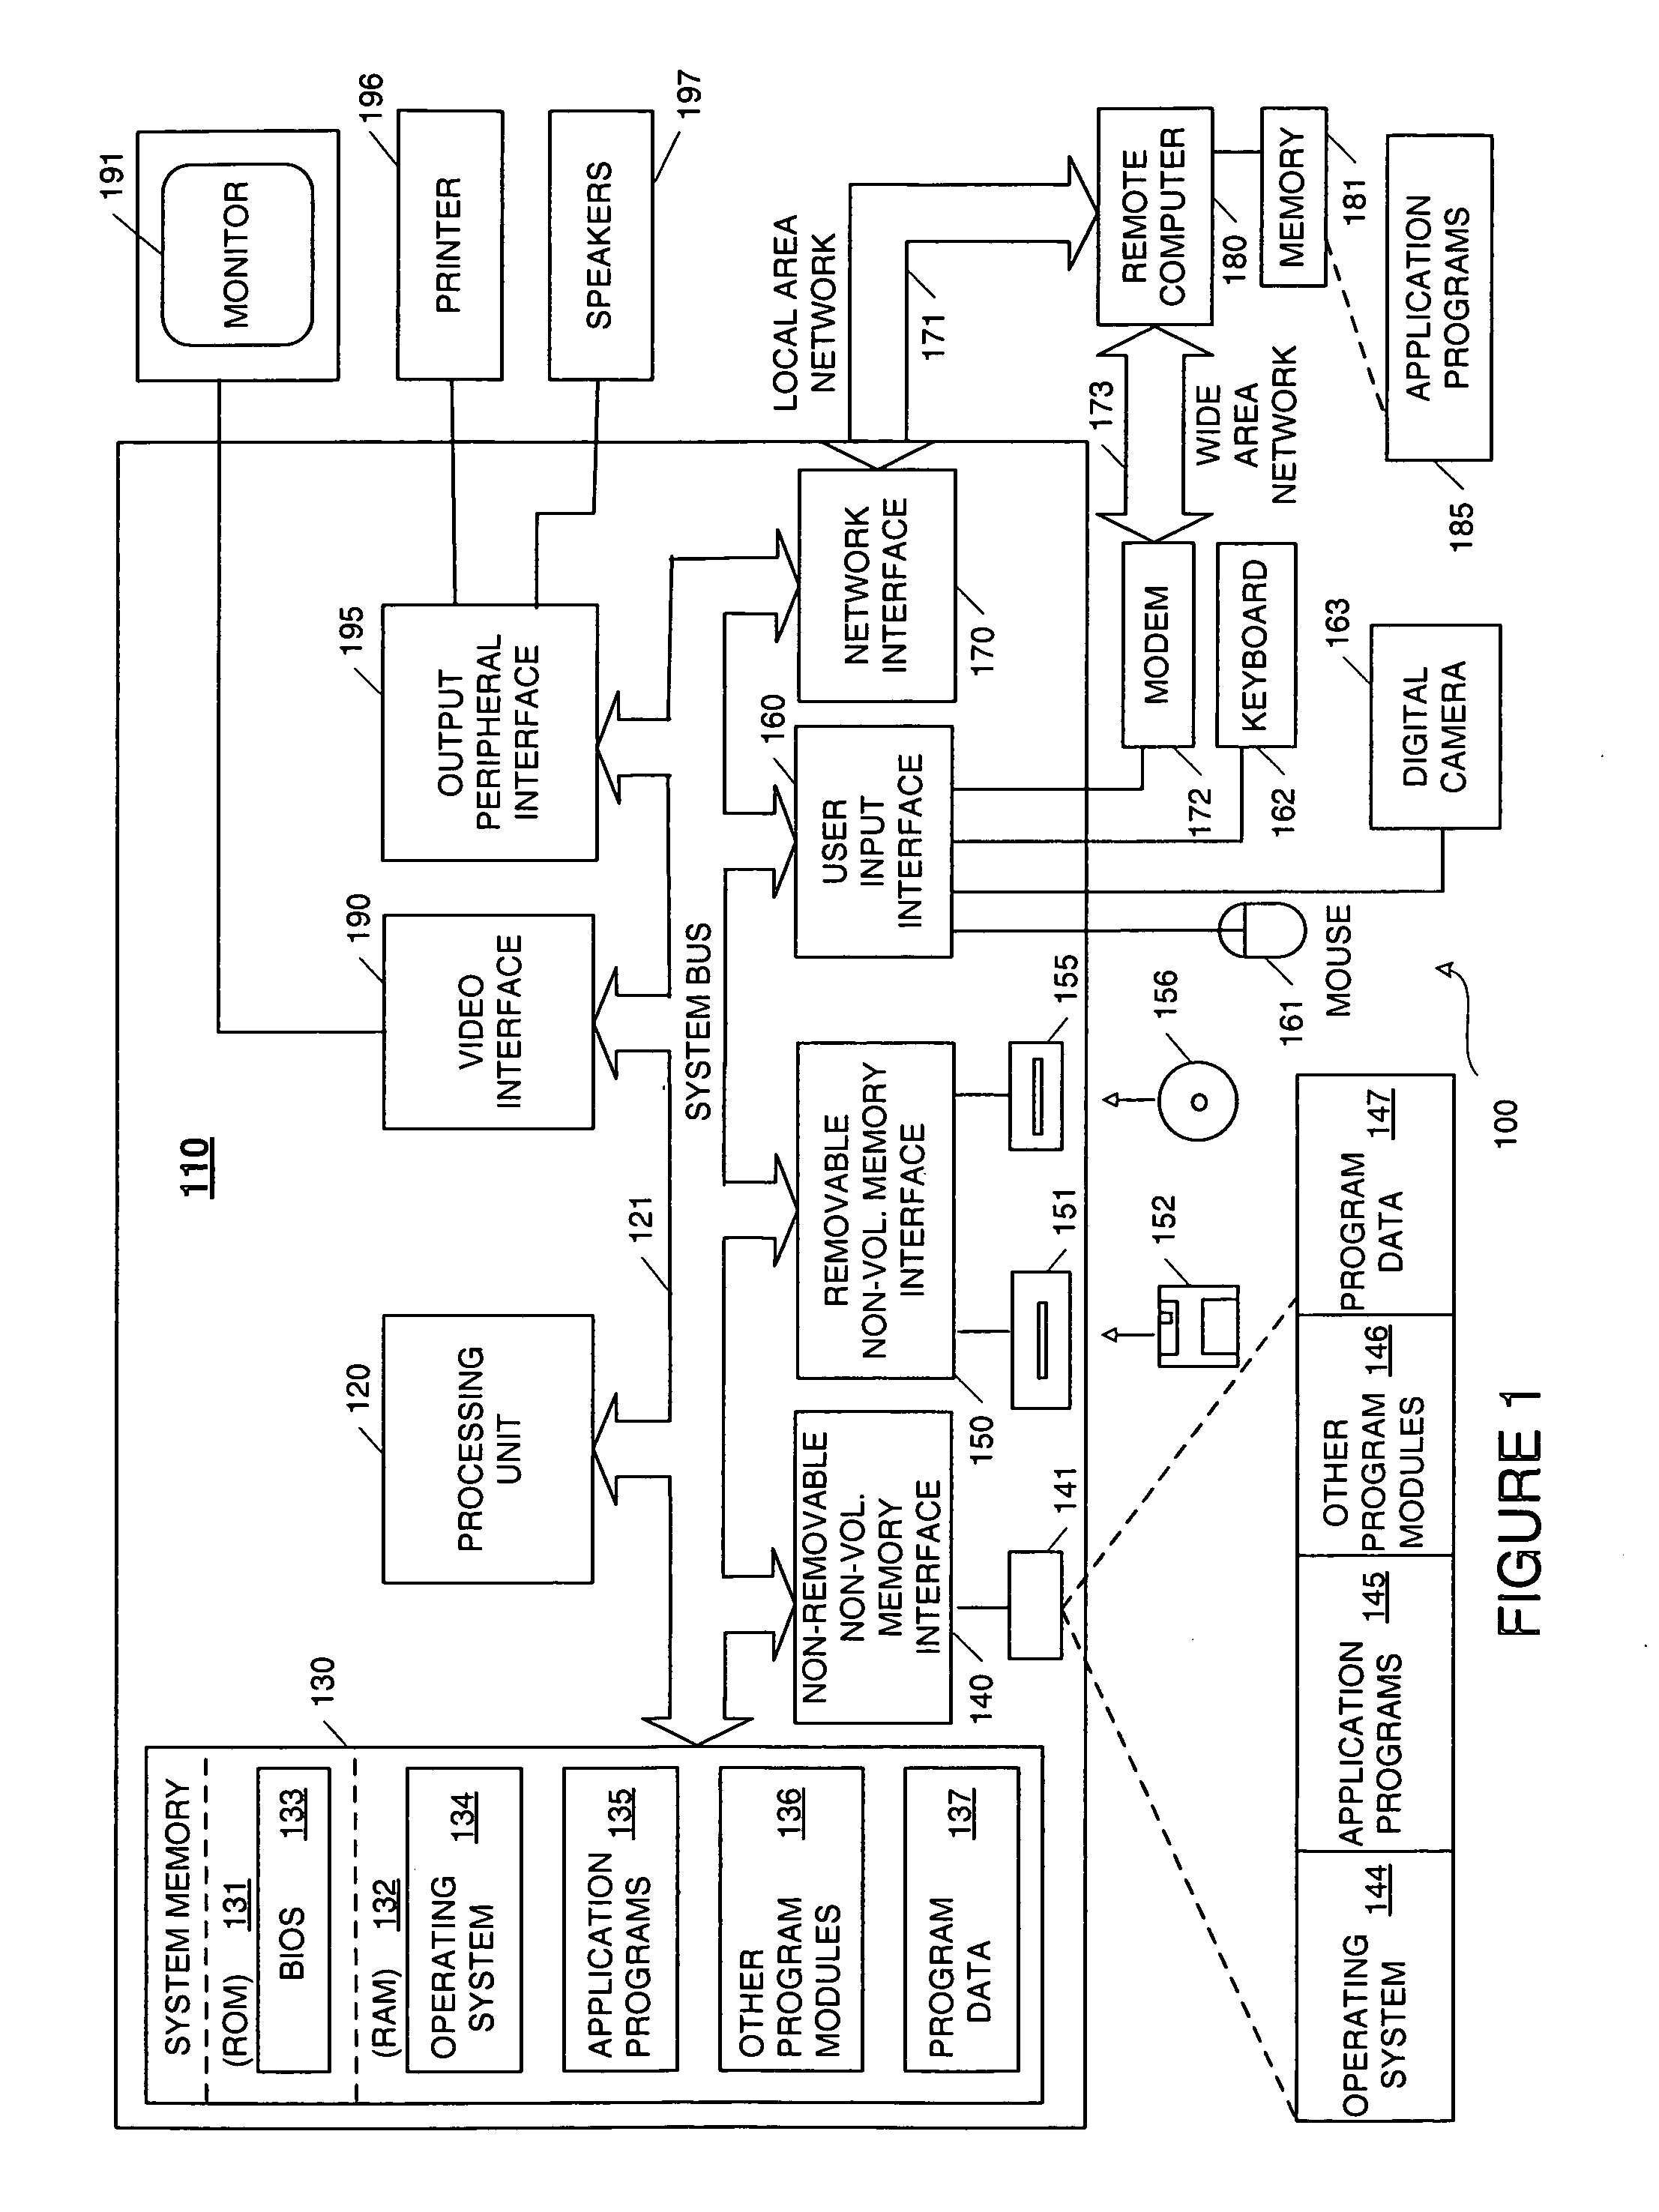 Modular, attachable objects with tags as intuitive physical interface facilitating user interaction with a computer